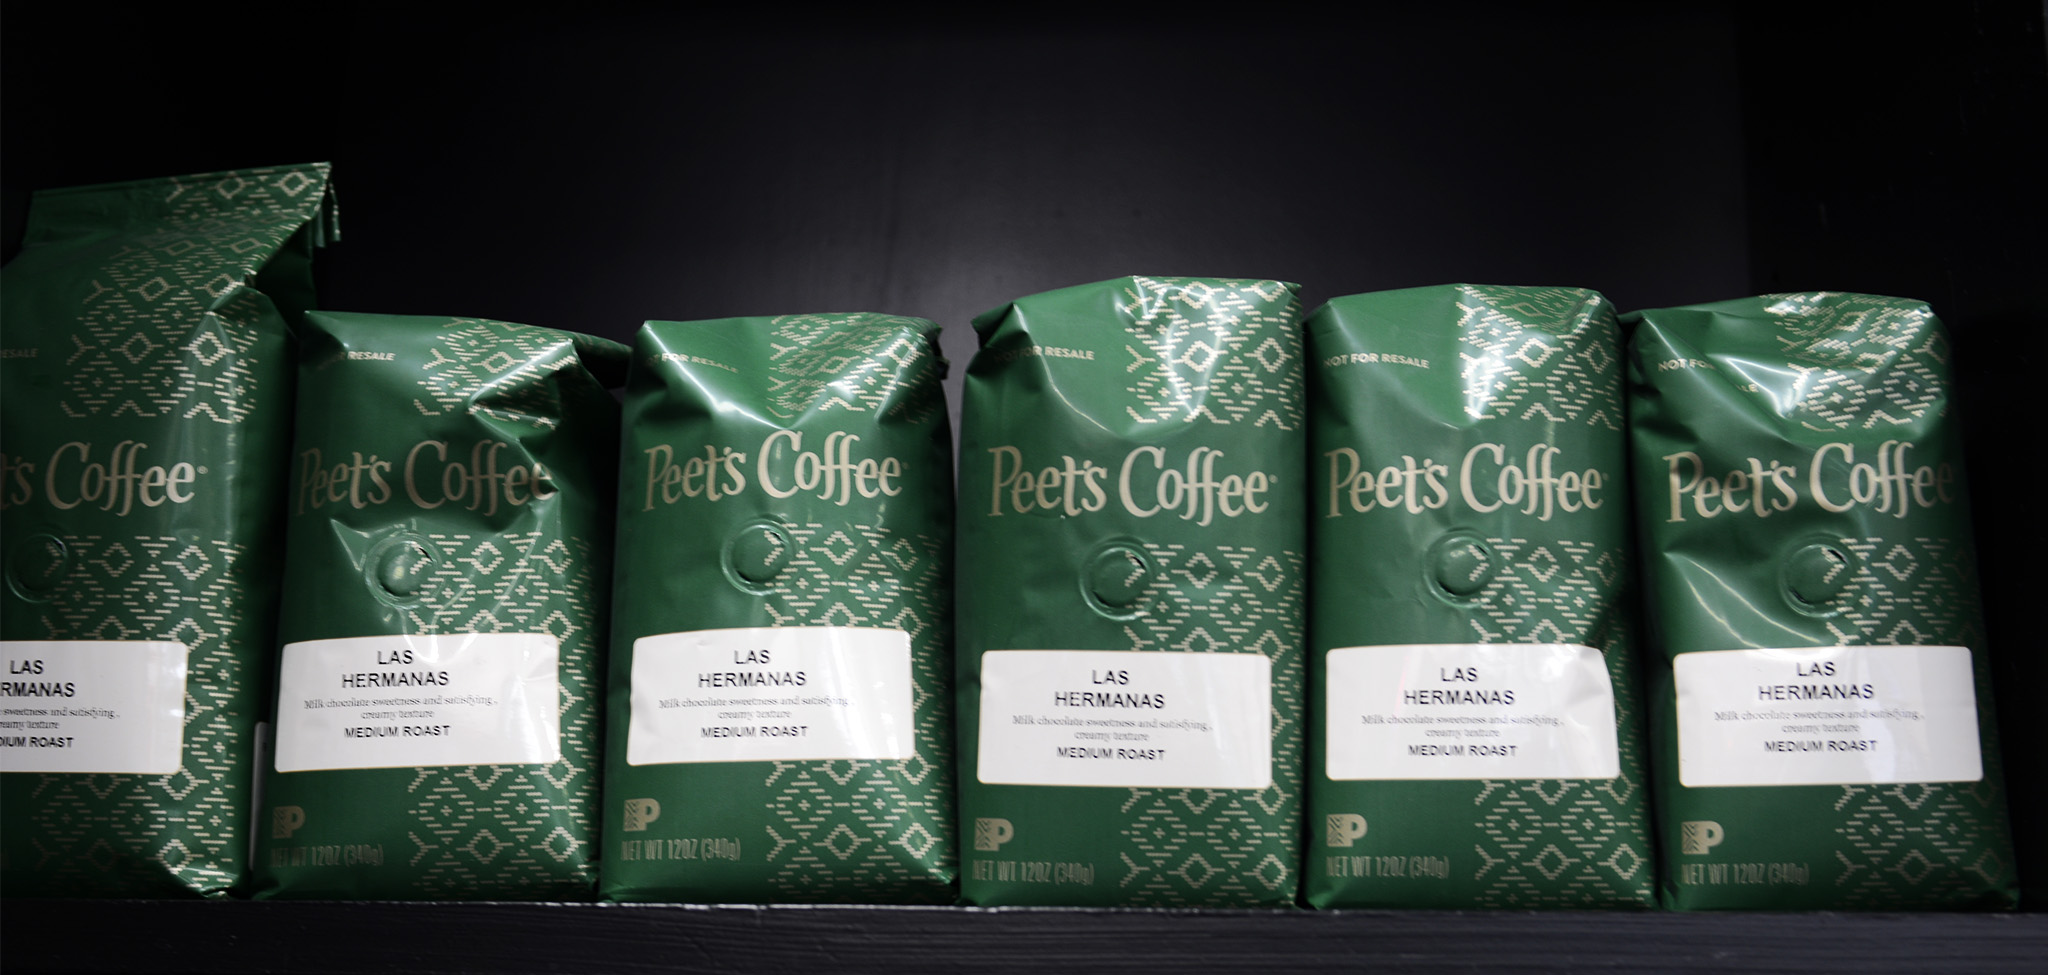 We provide Peet's Coffee beans for your own cofee making at home.